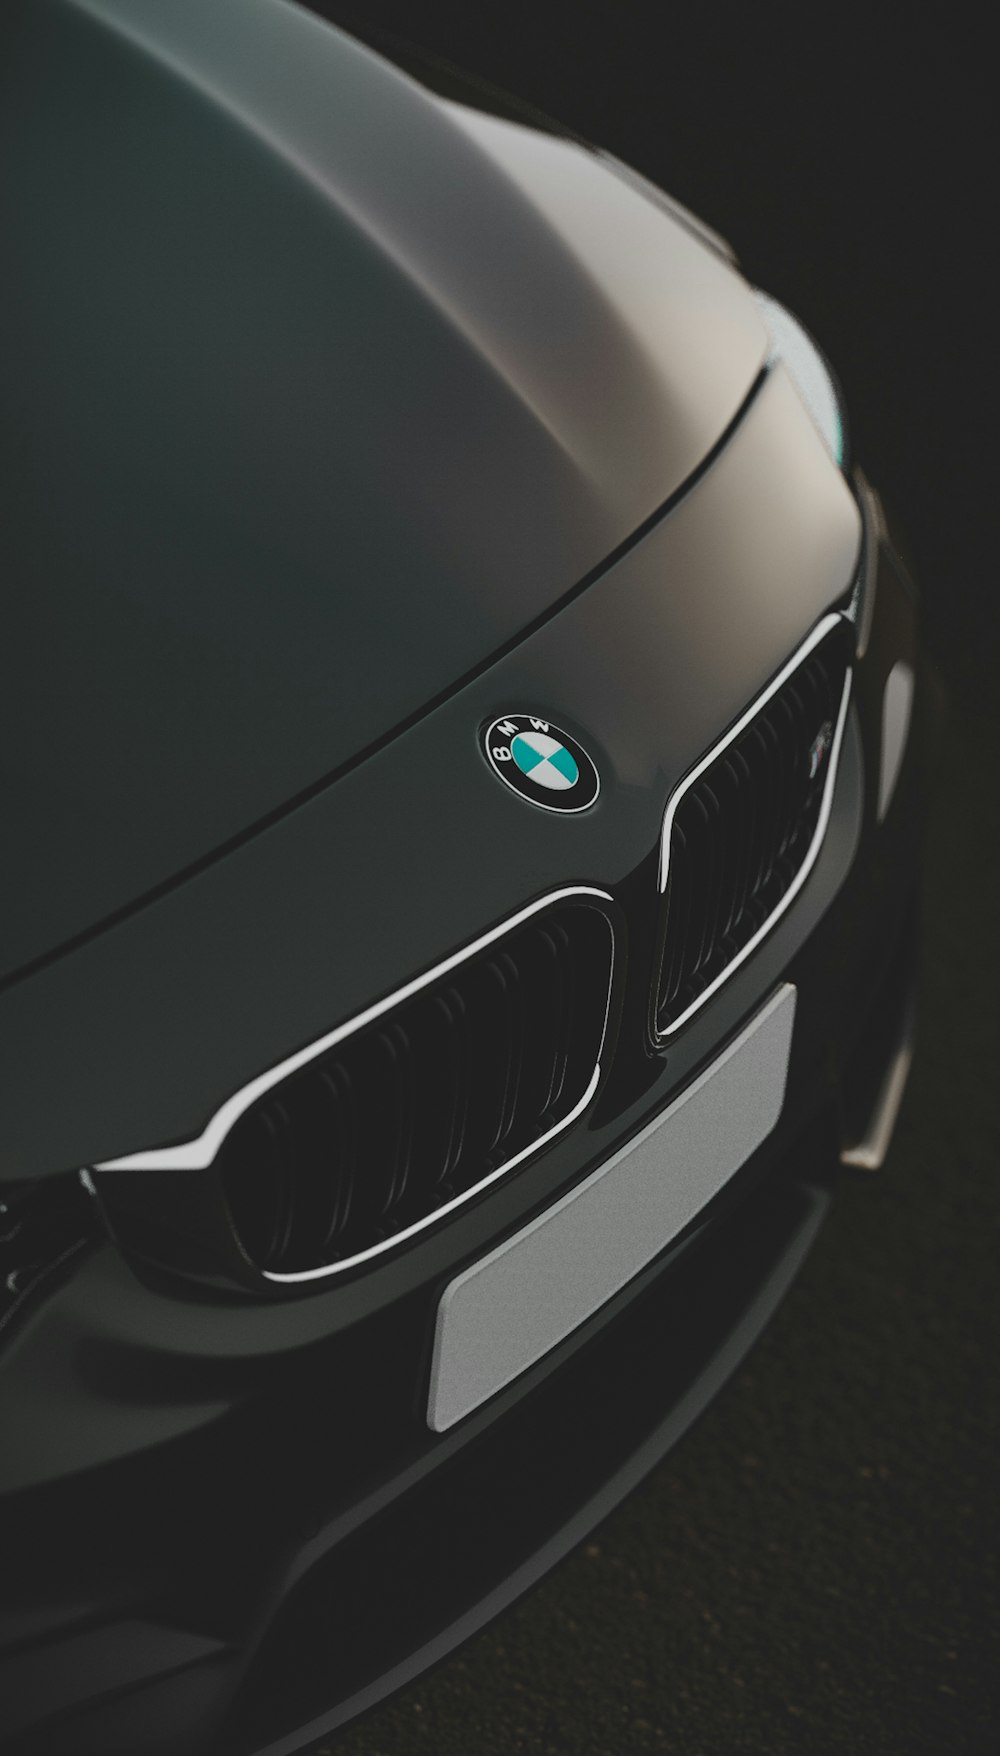 Bmw Logo Hd Wallpapers For Mobile - Infoupdate.org